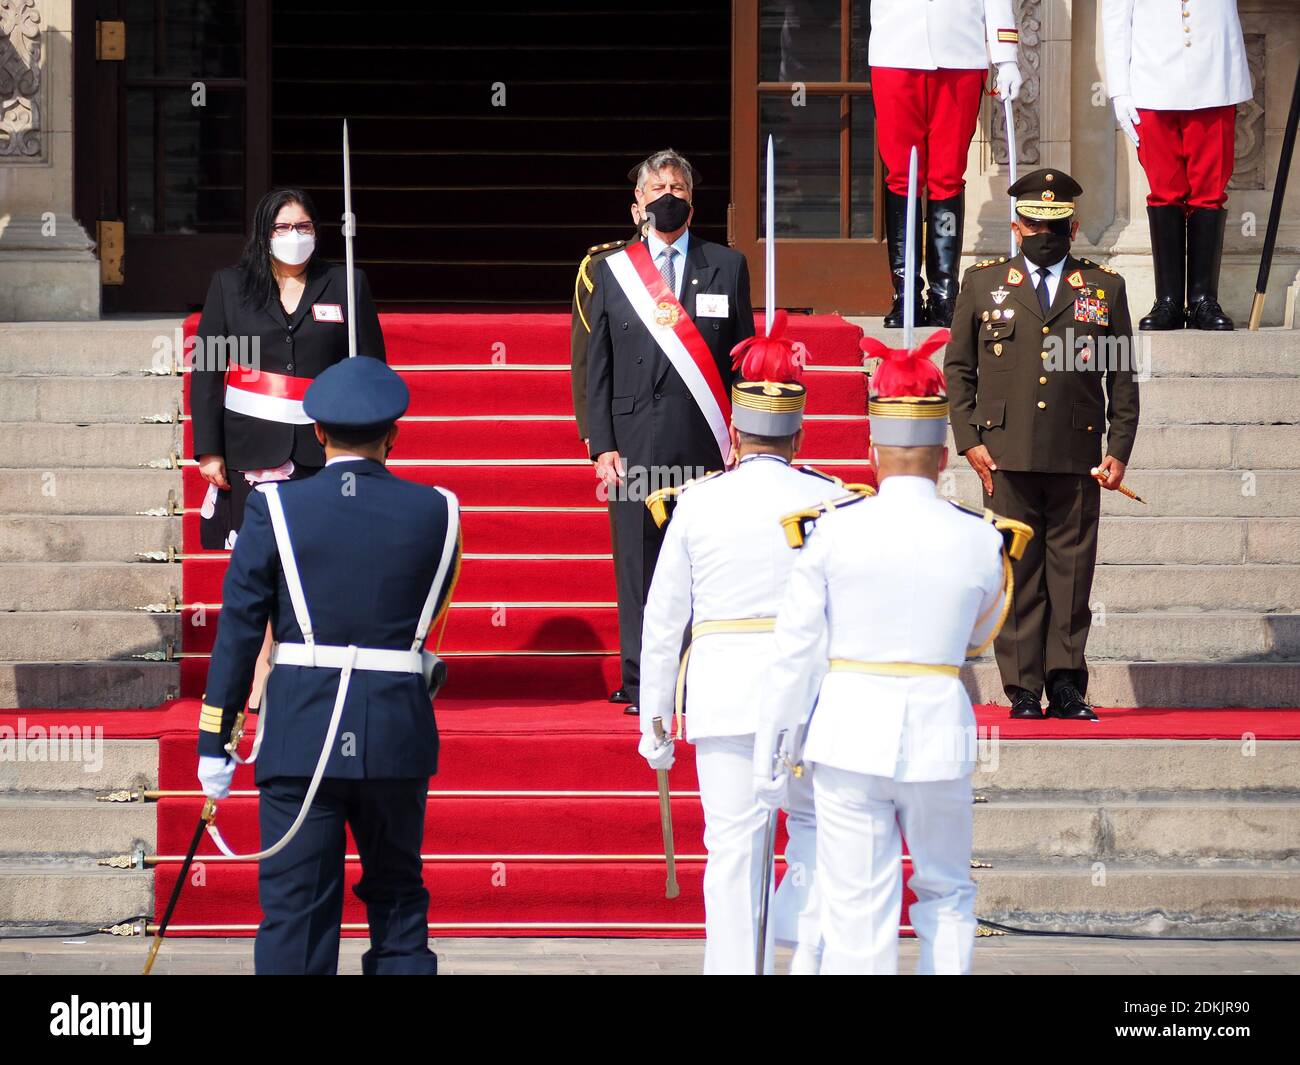 From left to right: Nuria Esparch, Minister of Defense, Francisco Sagasti, President of Peru; General César Astudillo, Chief of the Joint Command of the Armed Forces. The President,  leads the ceremony of awarding the Sword of Honour to the officers, recently graduated, who occupied the first position of their class in the training schools of the Armed Forces. Stock Photo